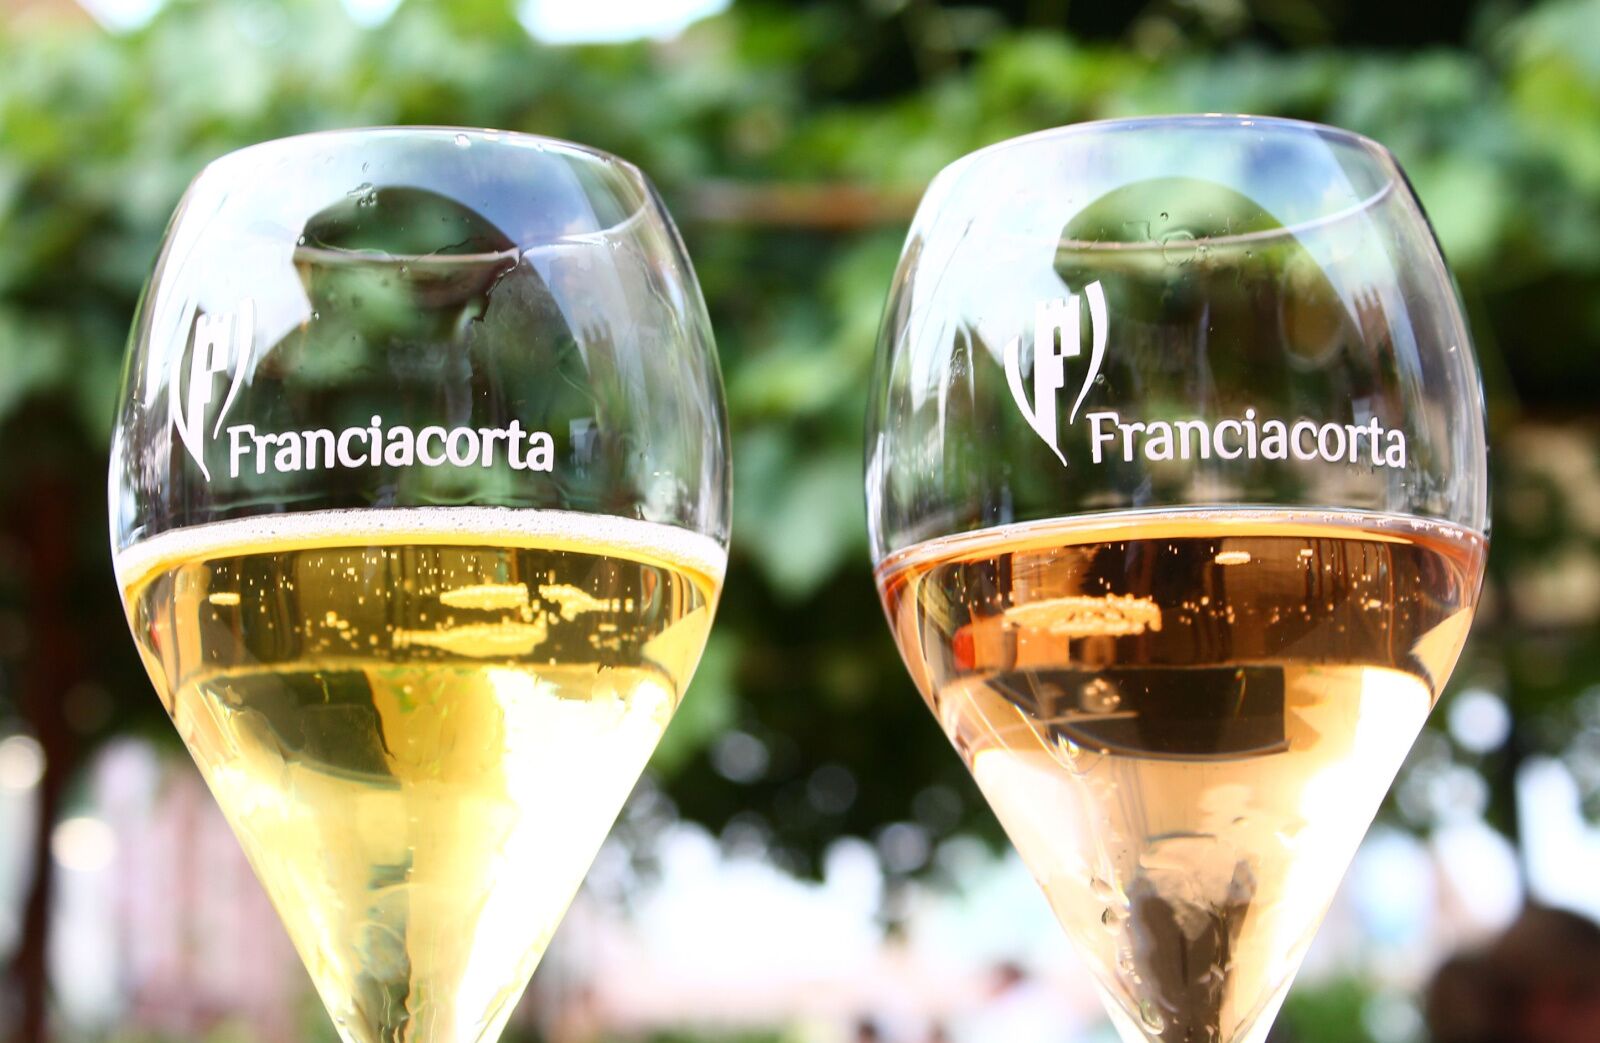 Franciacorta varities in a glass in italy